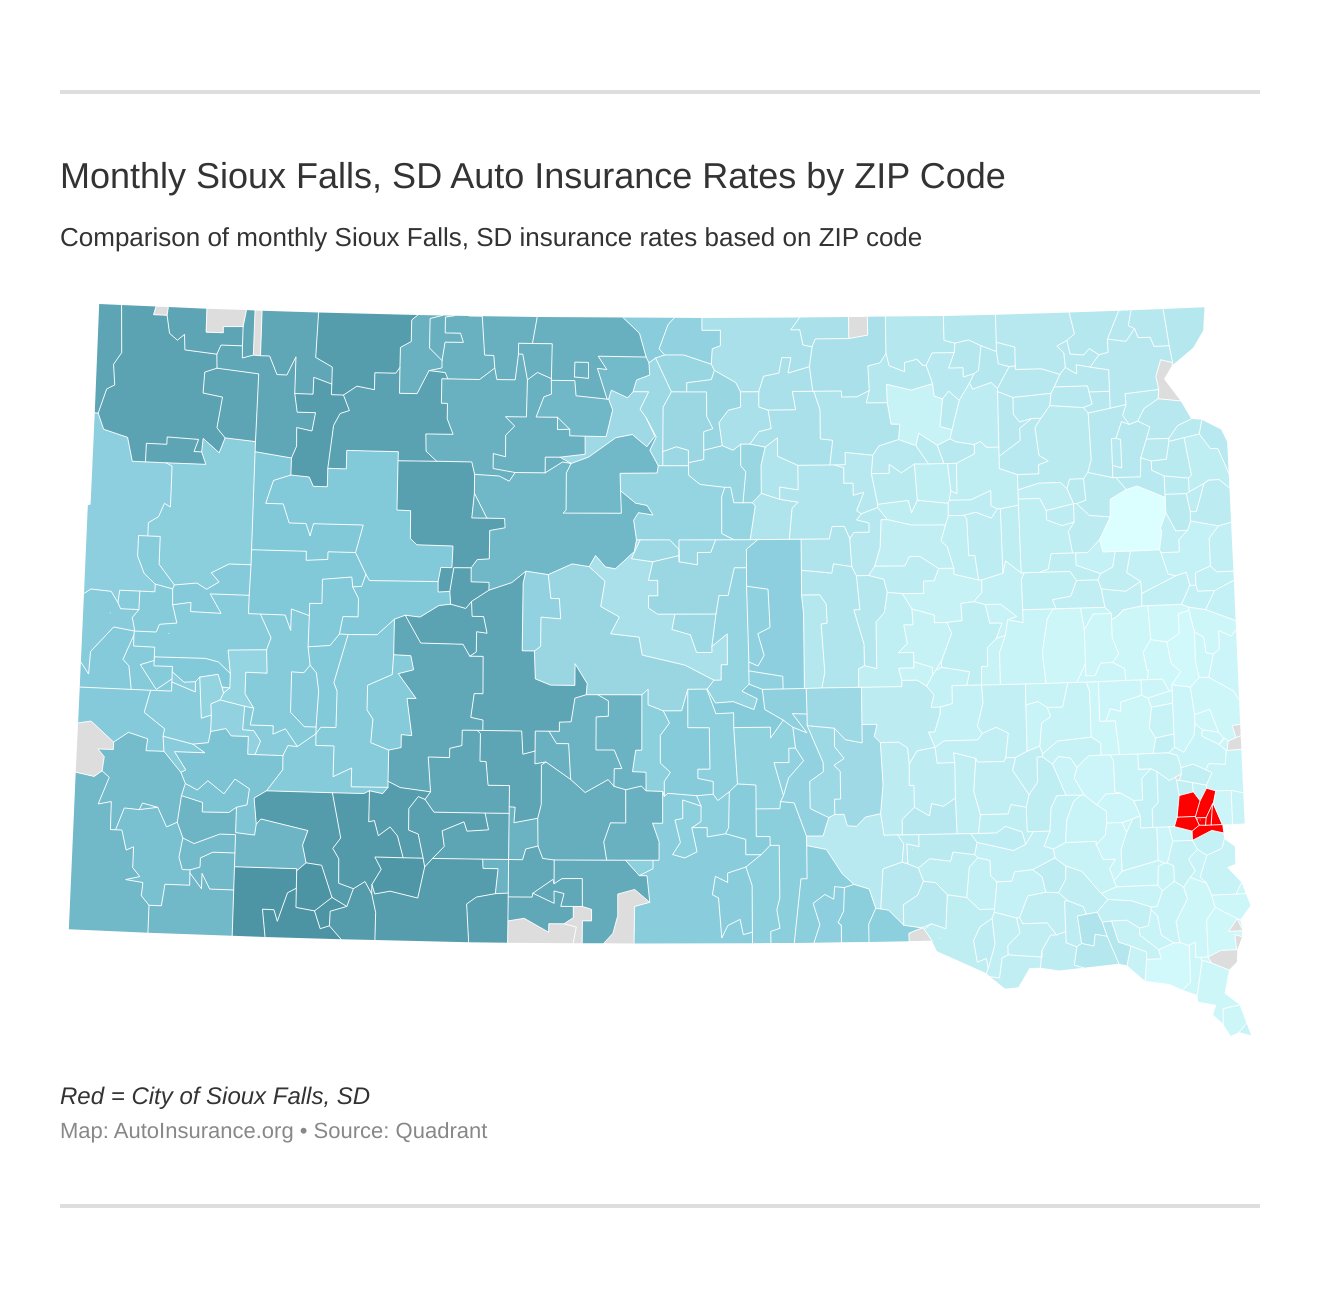 Monthly Sioux Falls, SD Auto Insurance Rates by ZIP Code